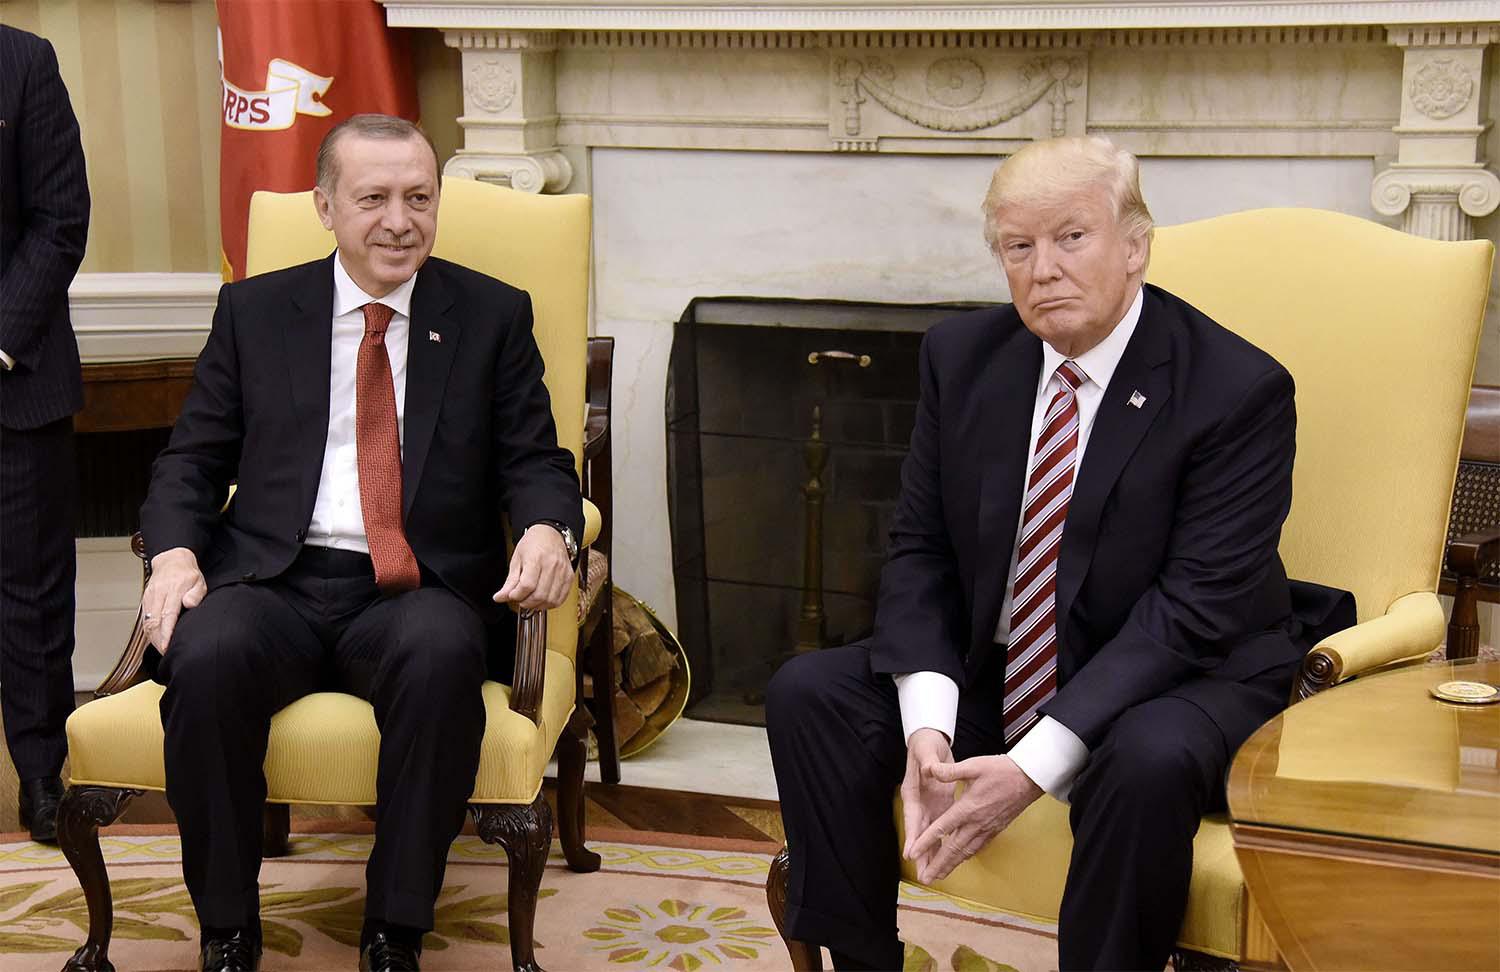 US President Donald Trump meets with President Recep Tayyip Erdogan of Turkey in the Oval Office of the White House in Washington, DC